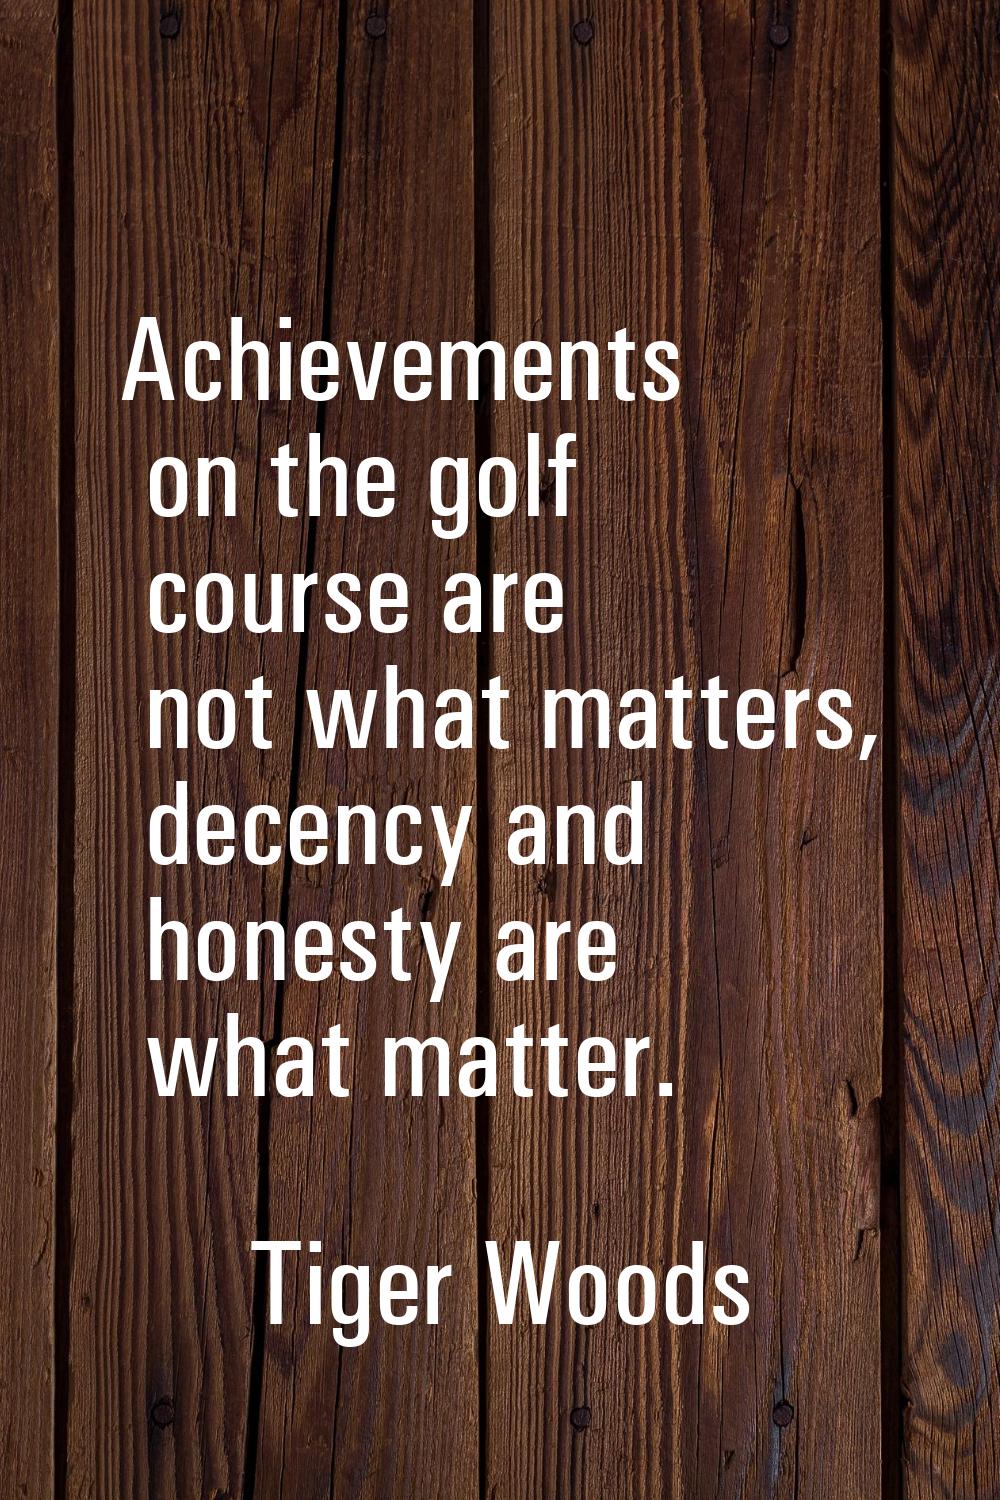 Achievements on the golf course are not what matters, decency and honesty are what matter.